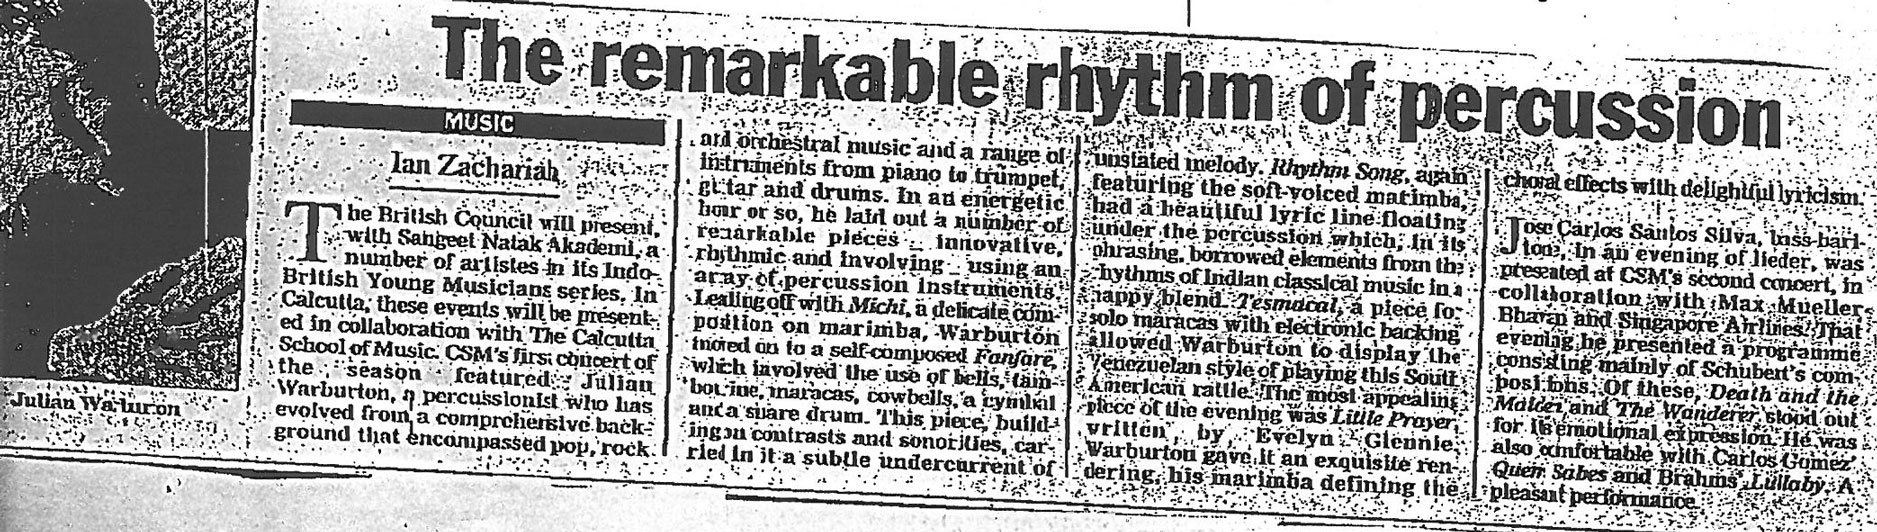 Review, 1998, The Telegraph